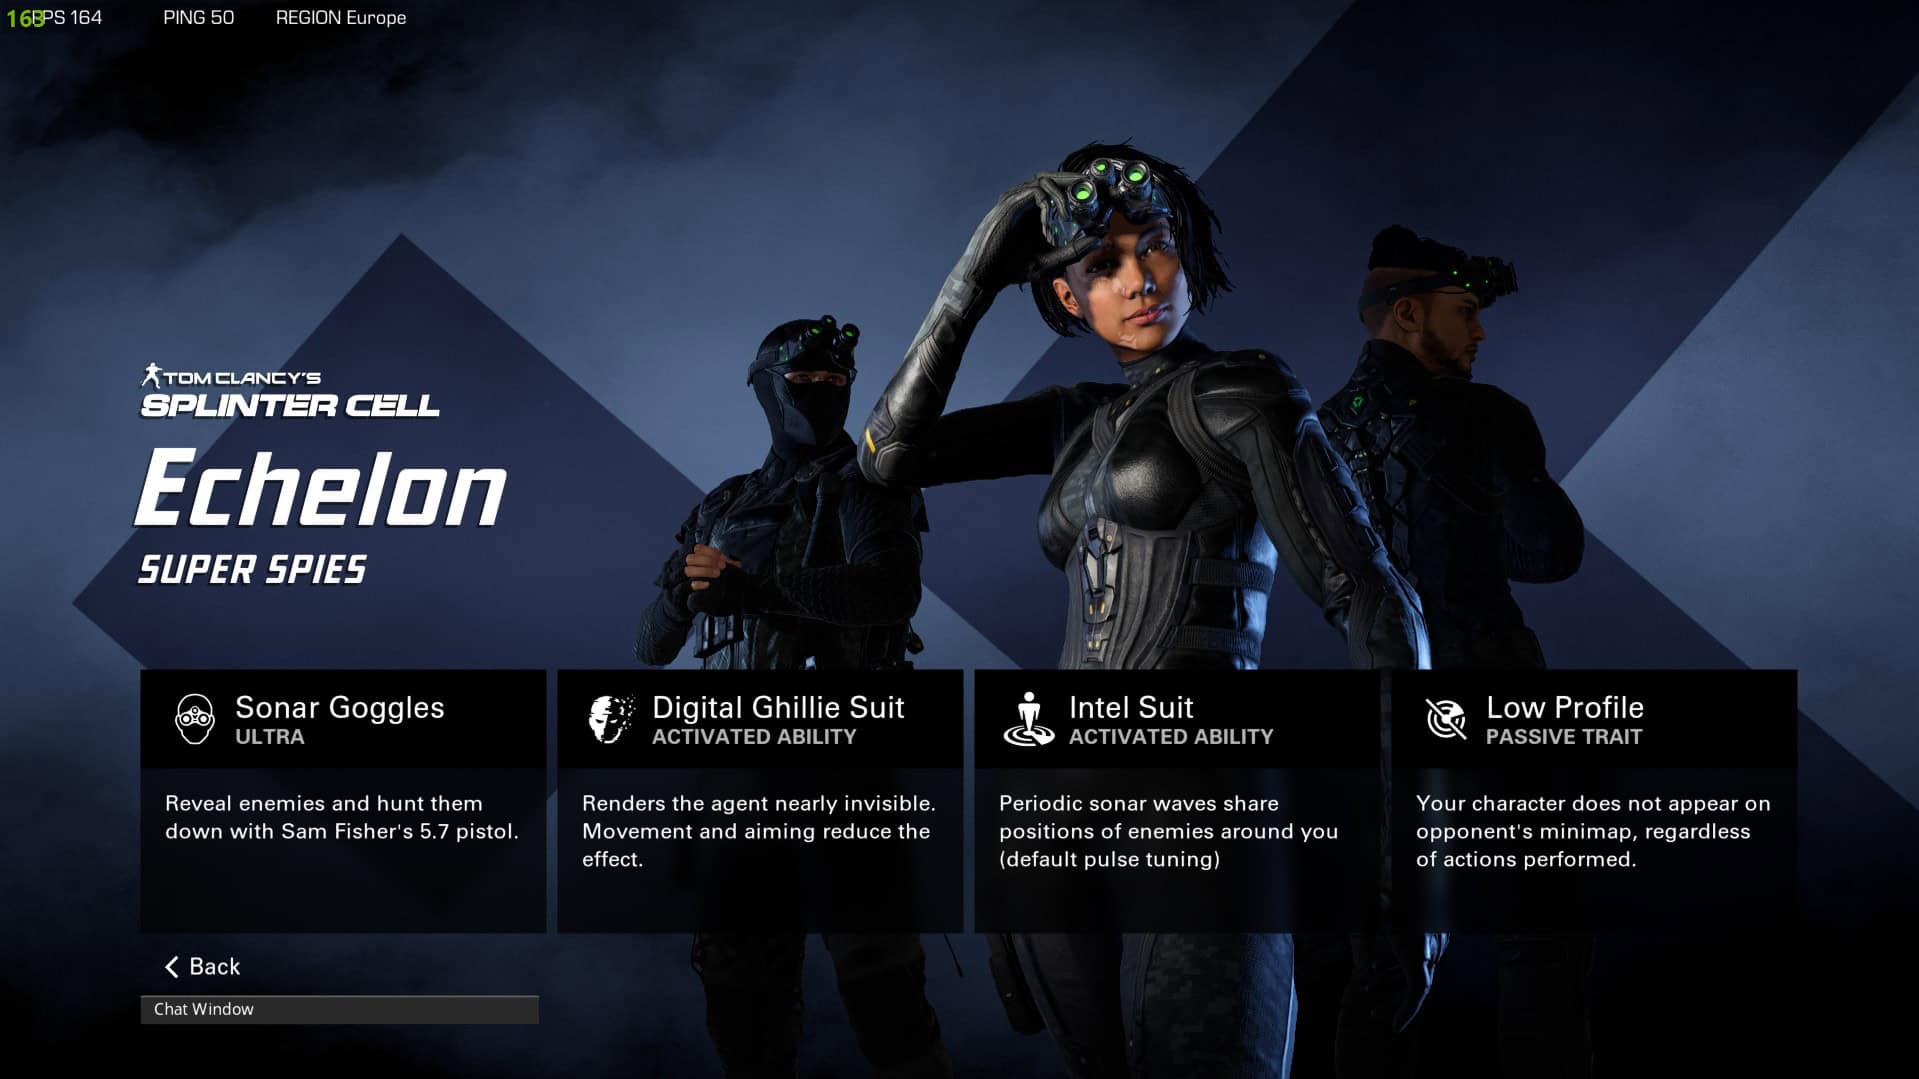 A squad of operatives in tactical gear are featured. Text descriptions detail four abilities: Sonar Goggles, Digital Ghillie Suit, Intel Suit, and Low Profile. Experience the action in "Tom Clancy's Splinter Cell Echelon," part of the XDefiant universe.